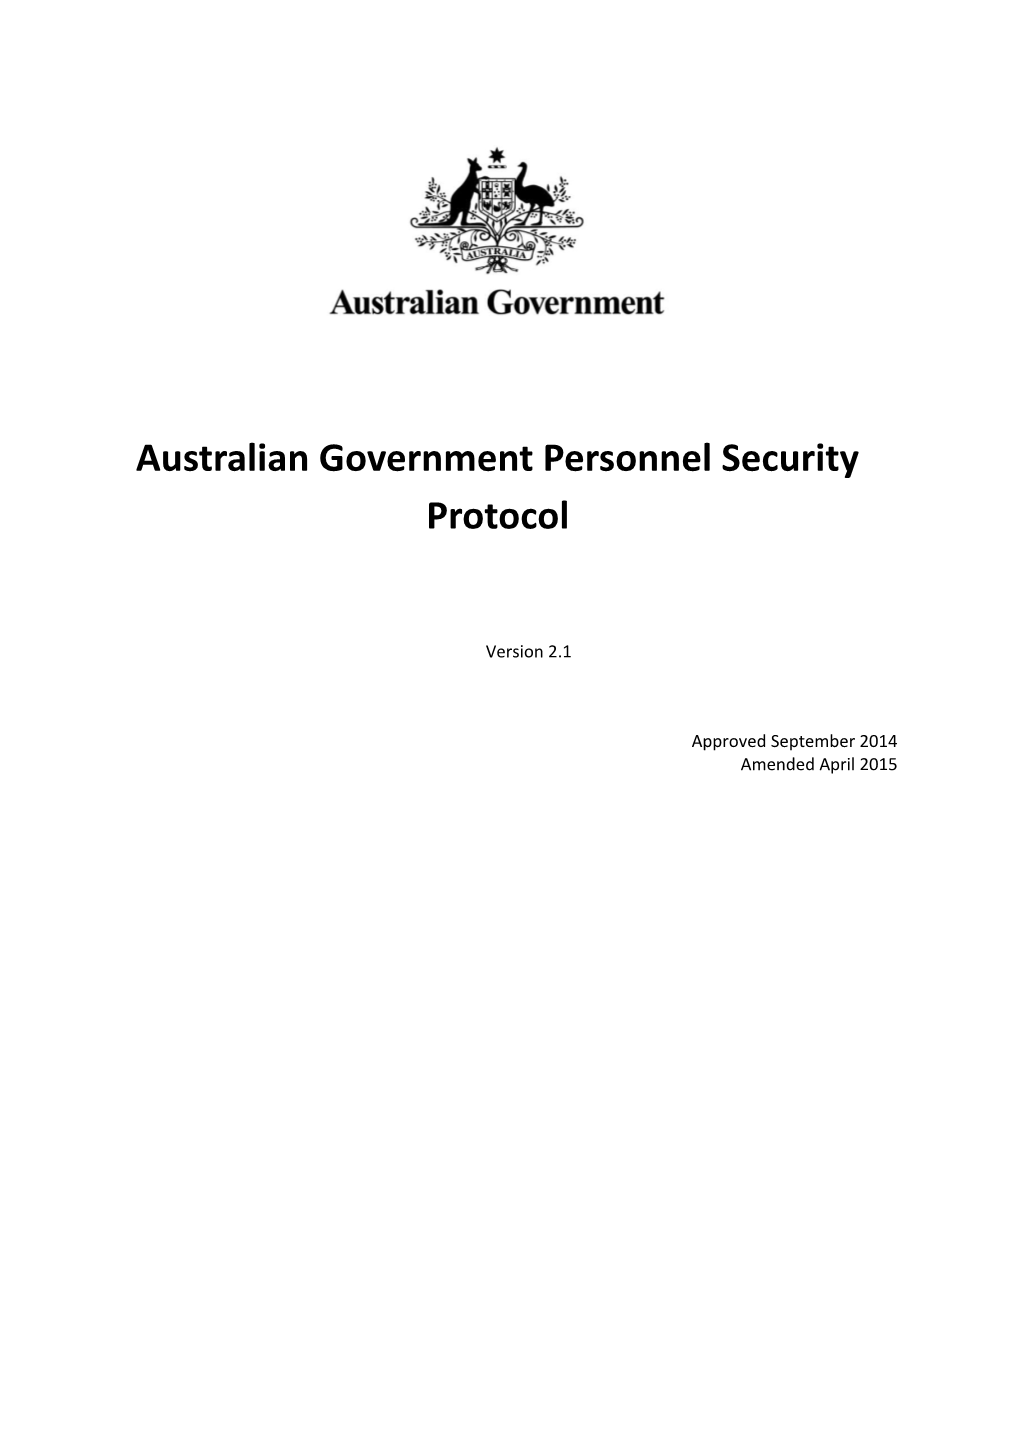 Australian Government Personnel Security Management Protocol